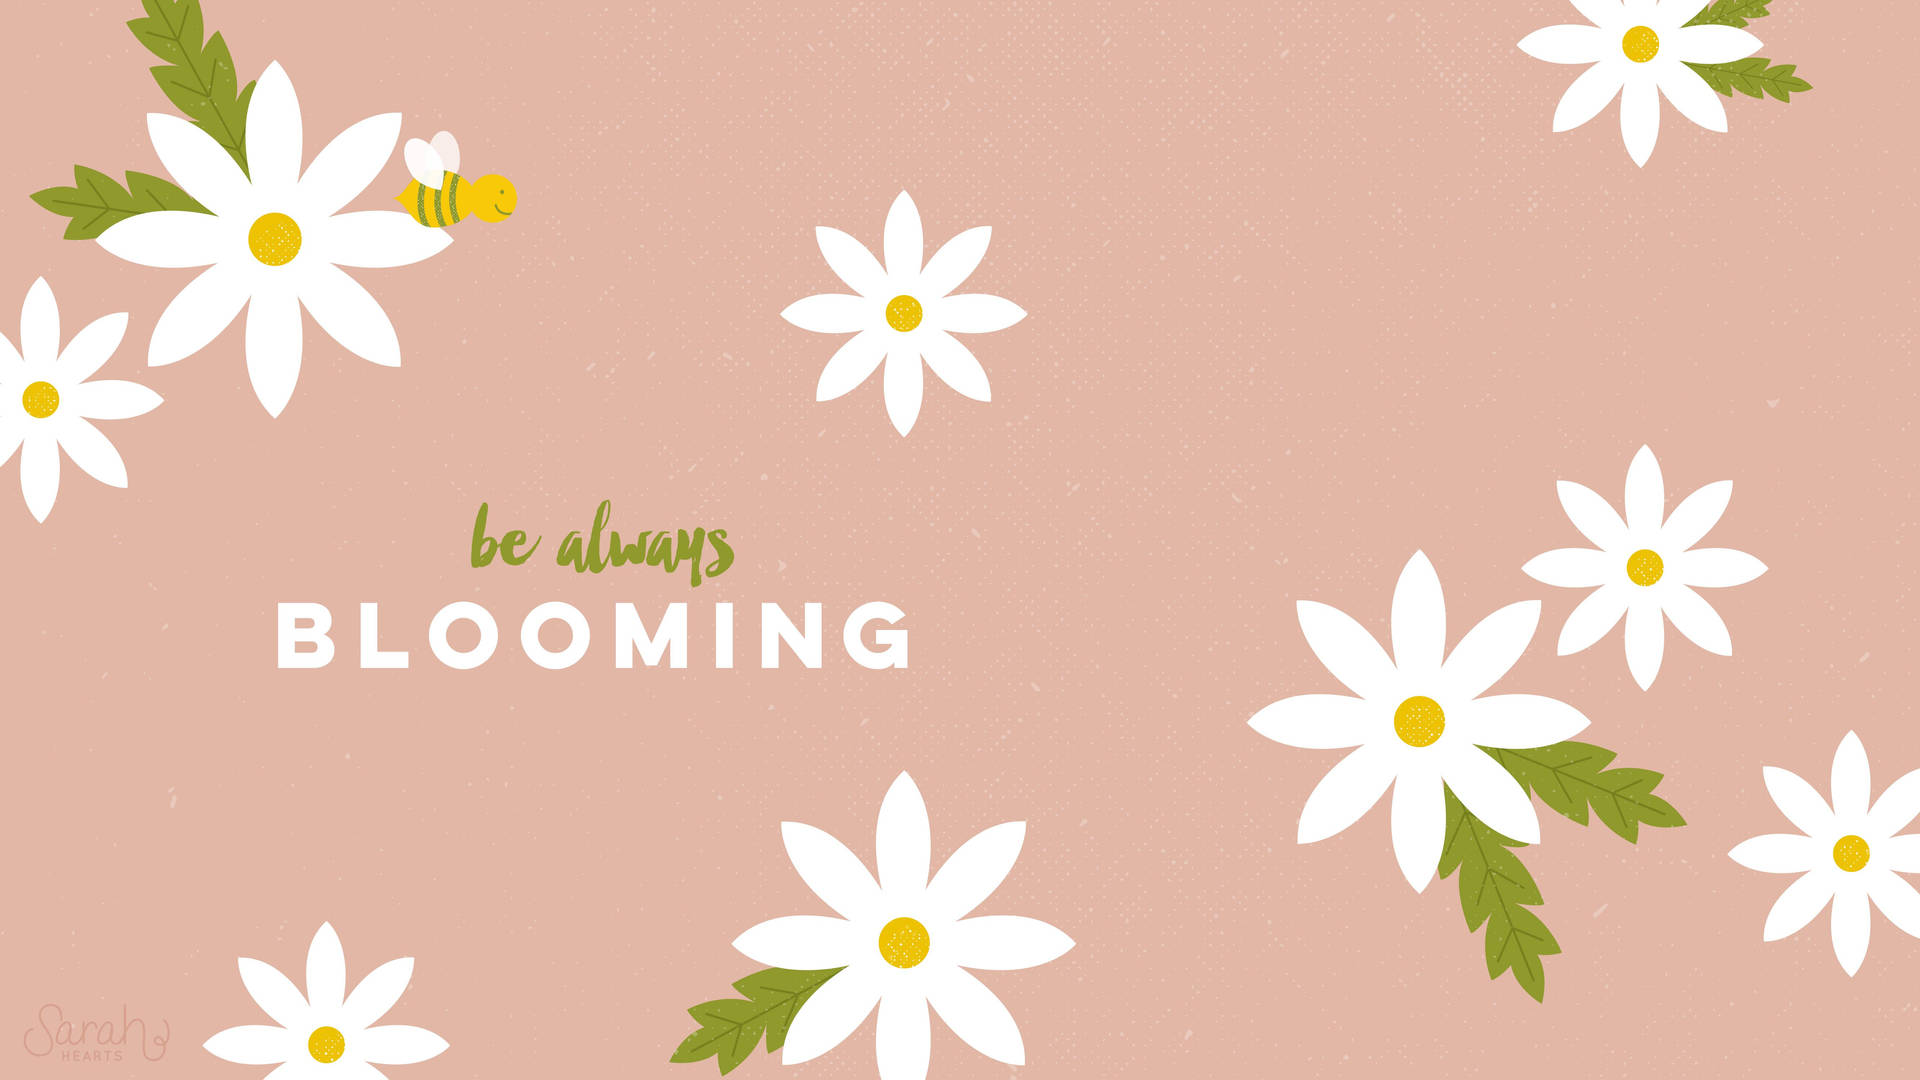 April brings with its fields of blooming flowers Wallpaper